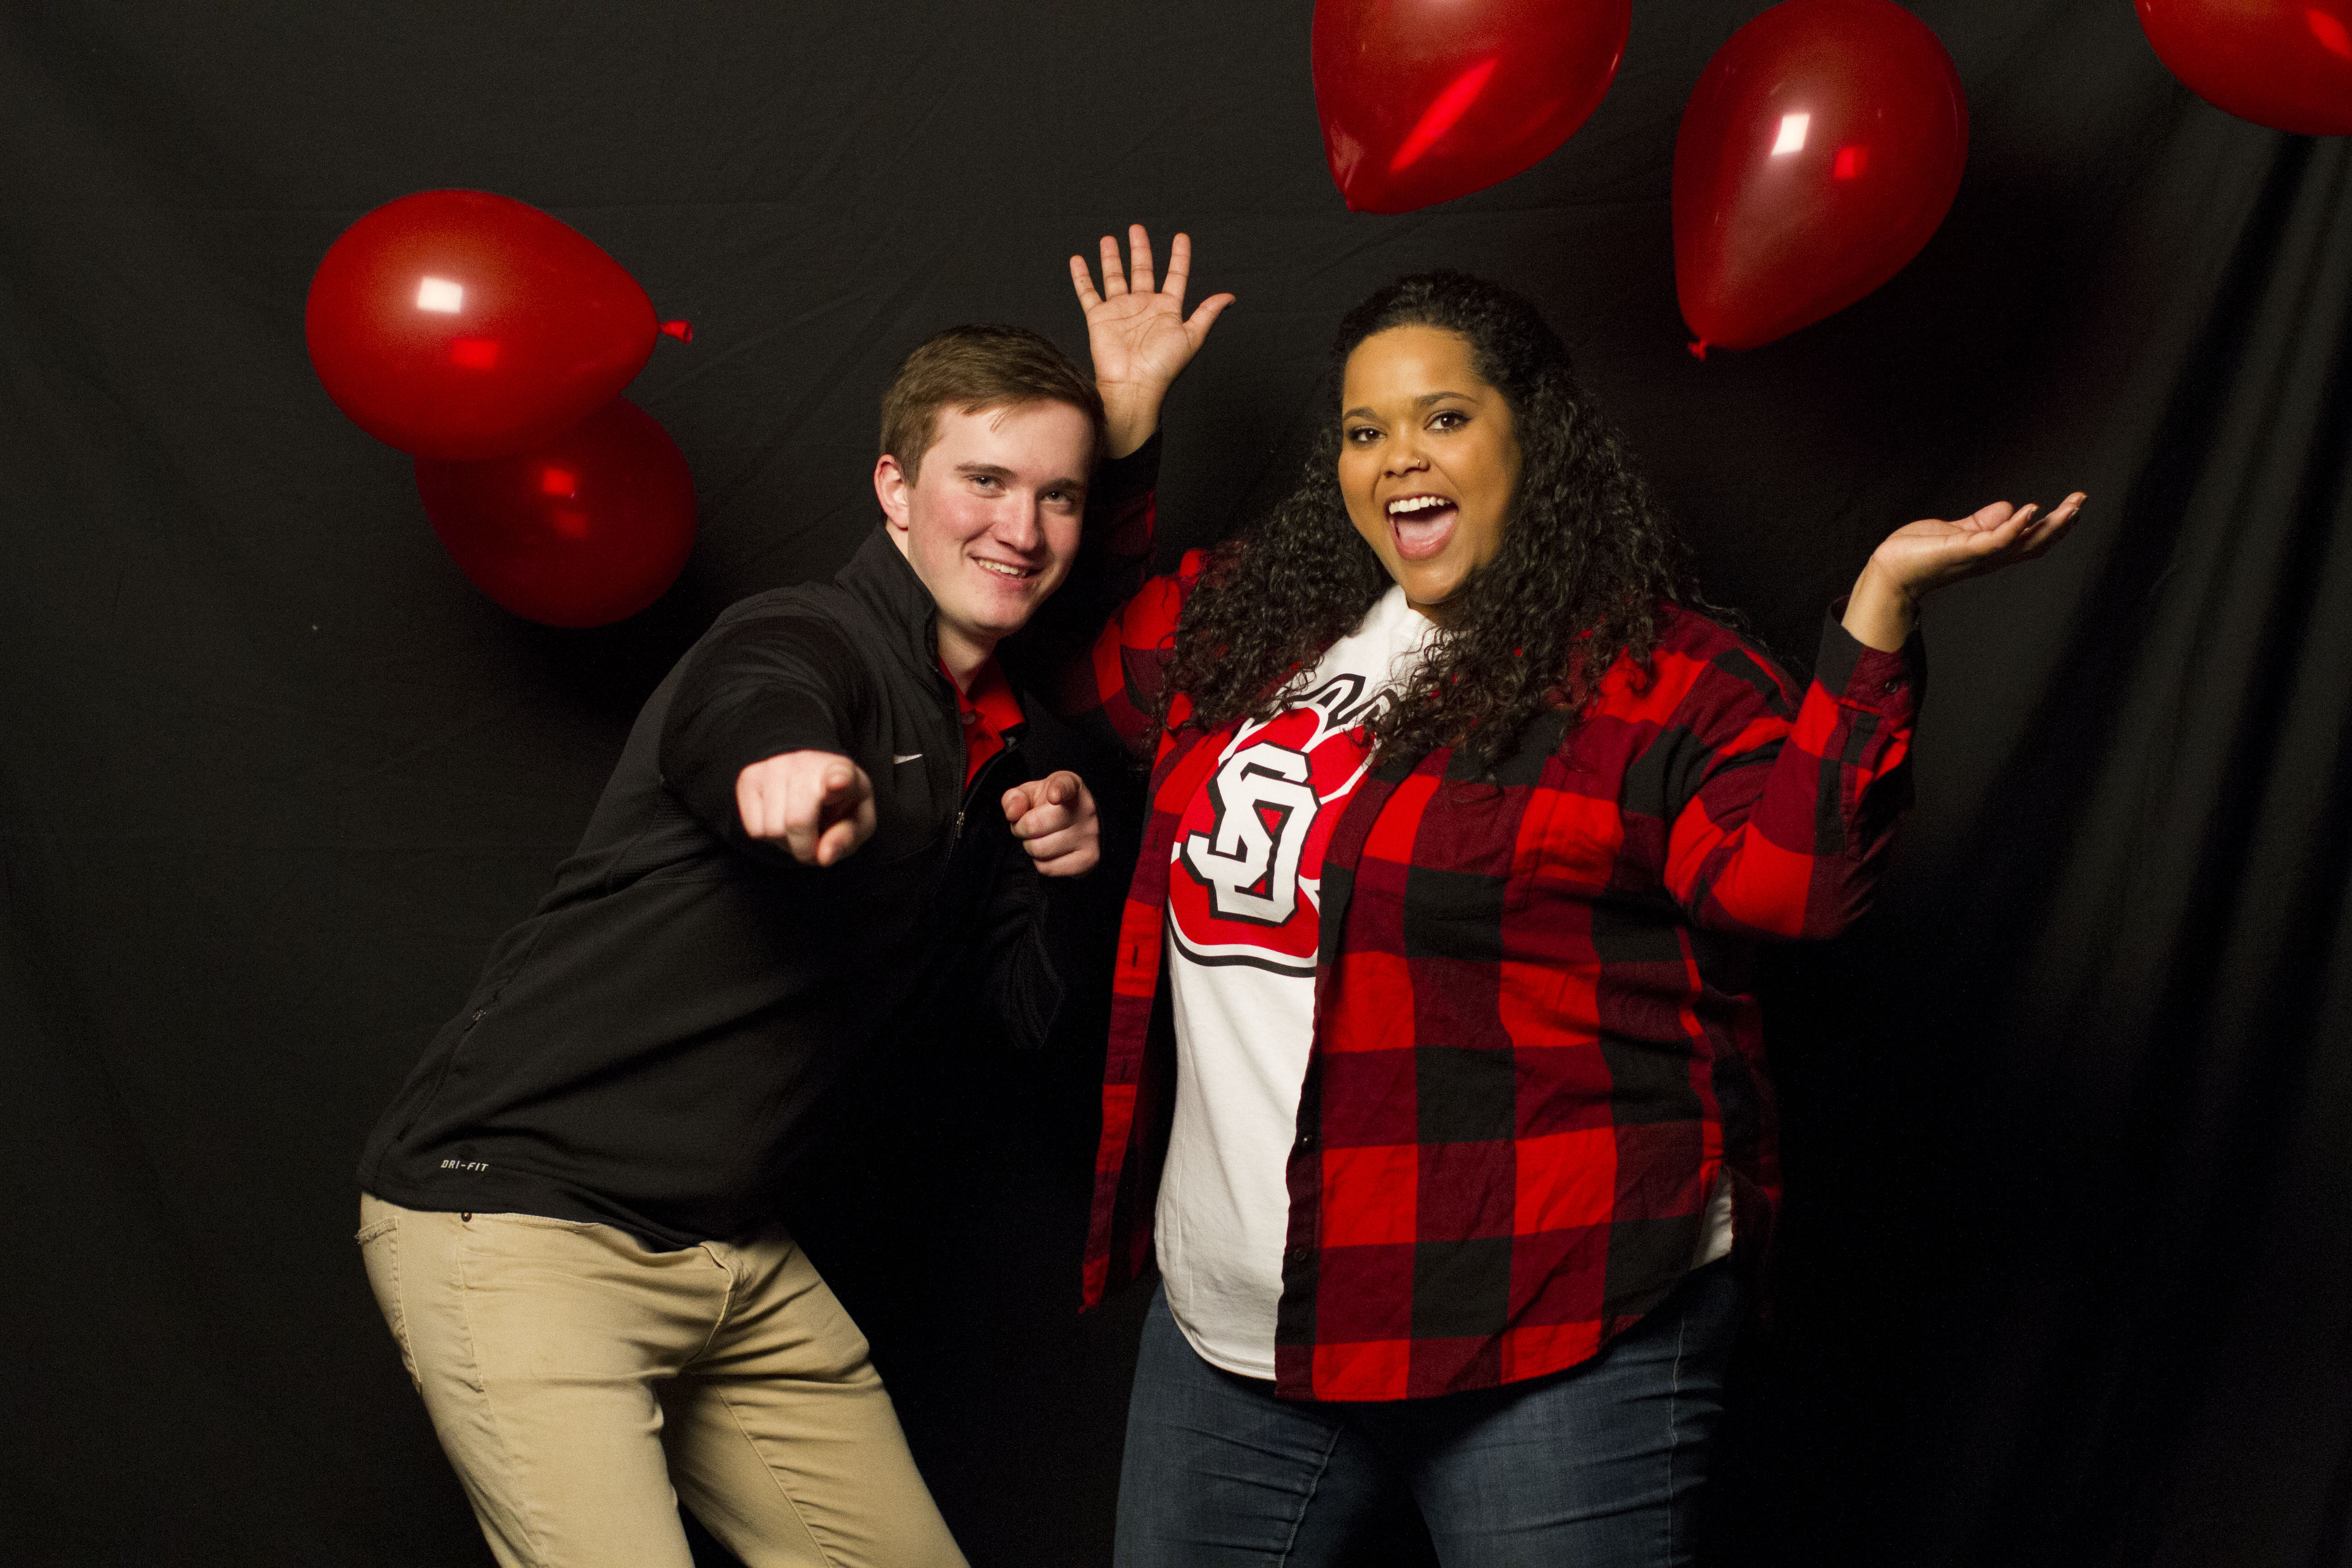 McNary and Anderson victorious in SGA election